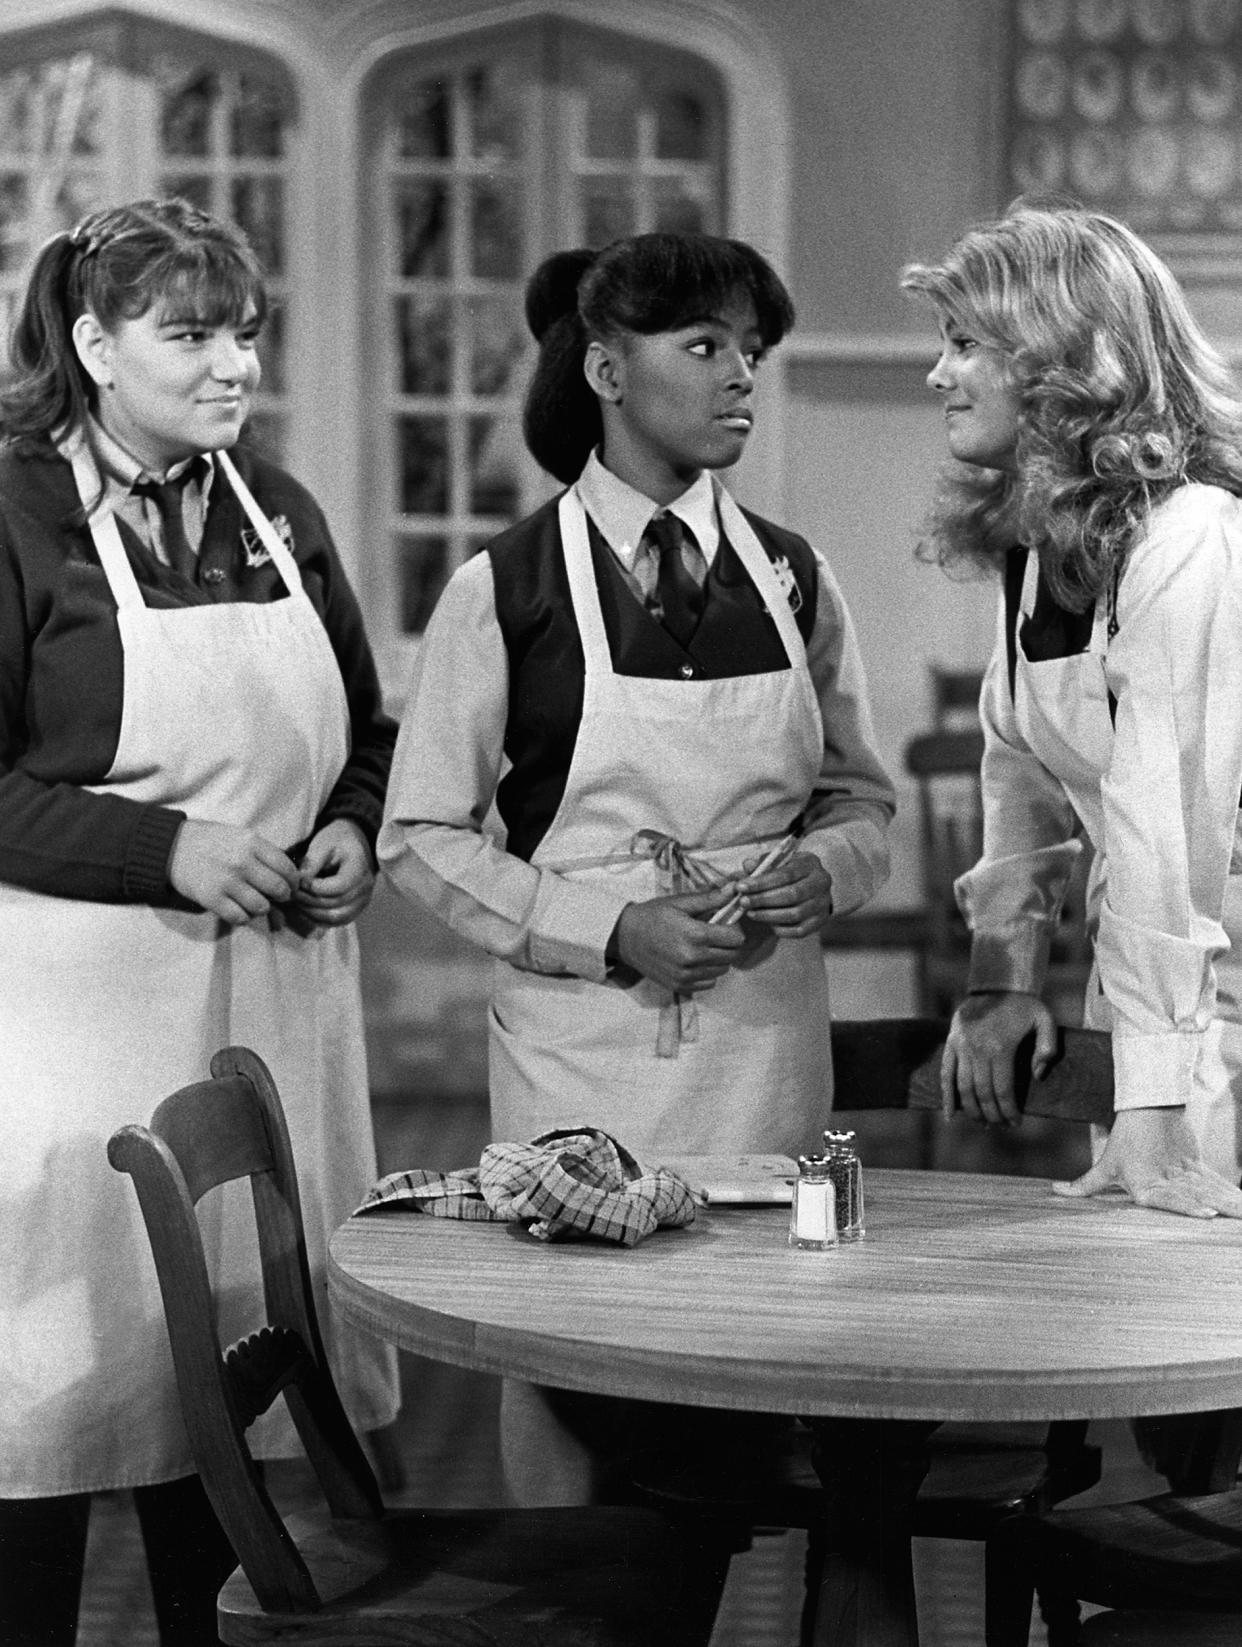 Studio Publicity Still from The Facts of Life Mindy Cohn, Kim Fields, Lisa Whelchel 1981  All Rights Reserved   File Reference # 32914_213THA  For Editorial Use Only (Alamy Stock Photo)